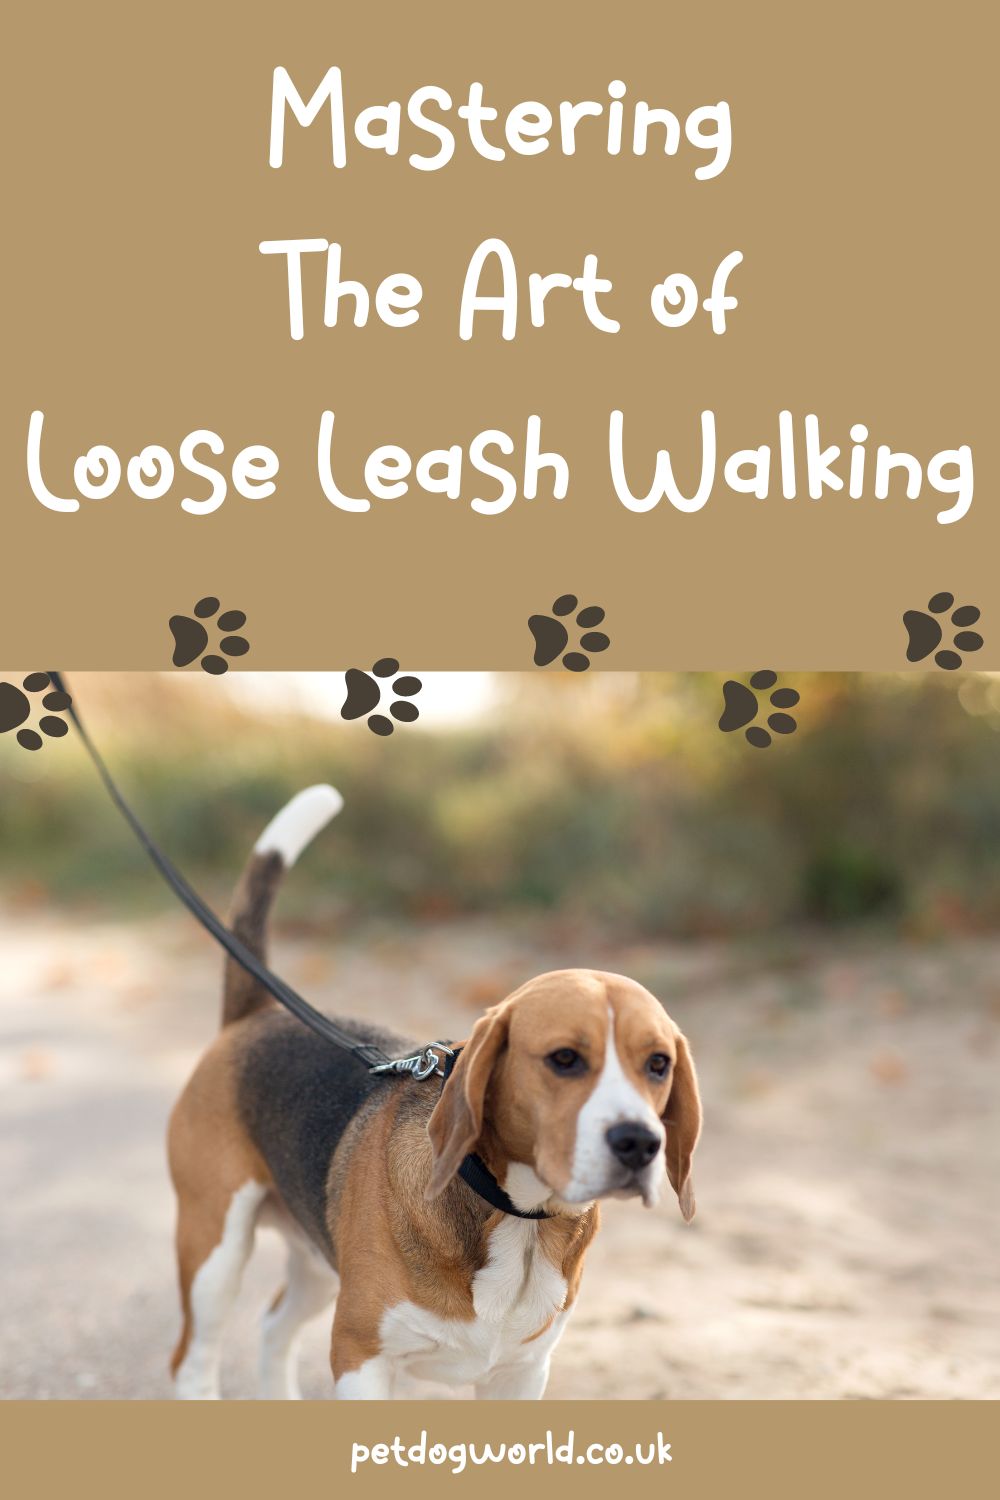 Discover the art of loose leash walking with this comprehensive guide. Learn the importance of this essential skill and follow step-by-step instructions to train your dog for enjoyable, stress-free strolls together.